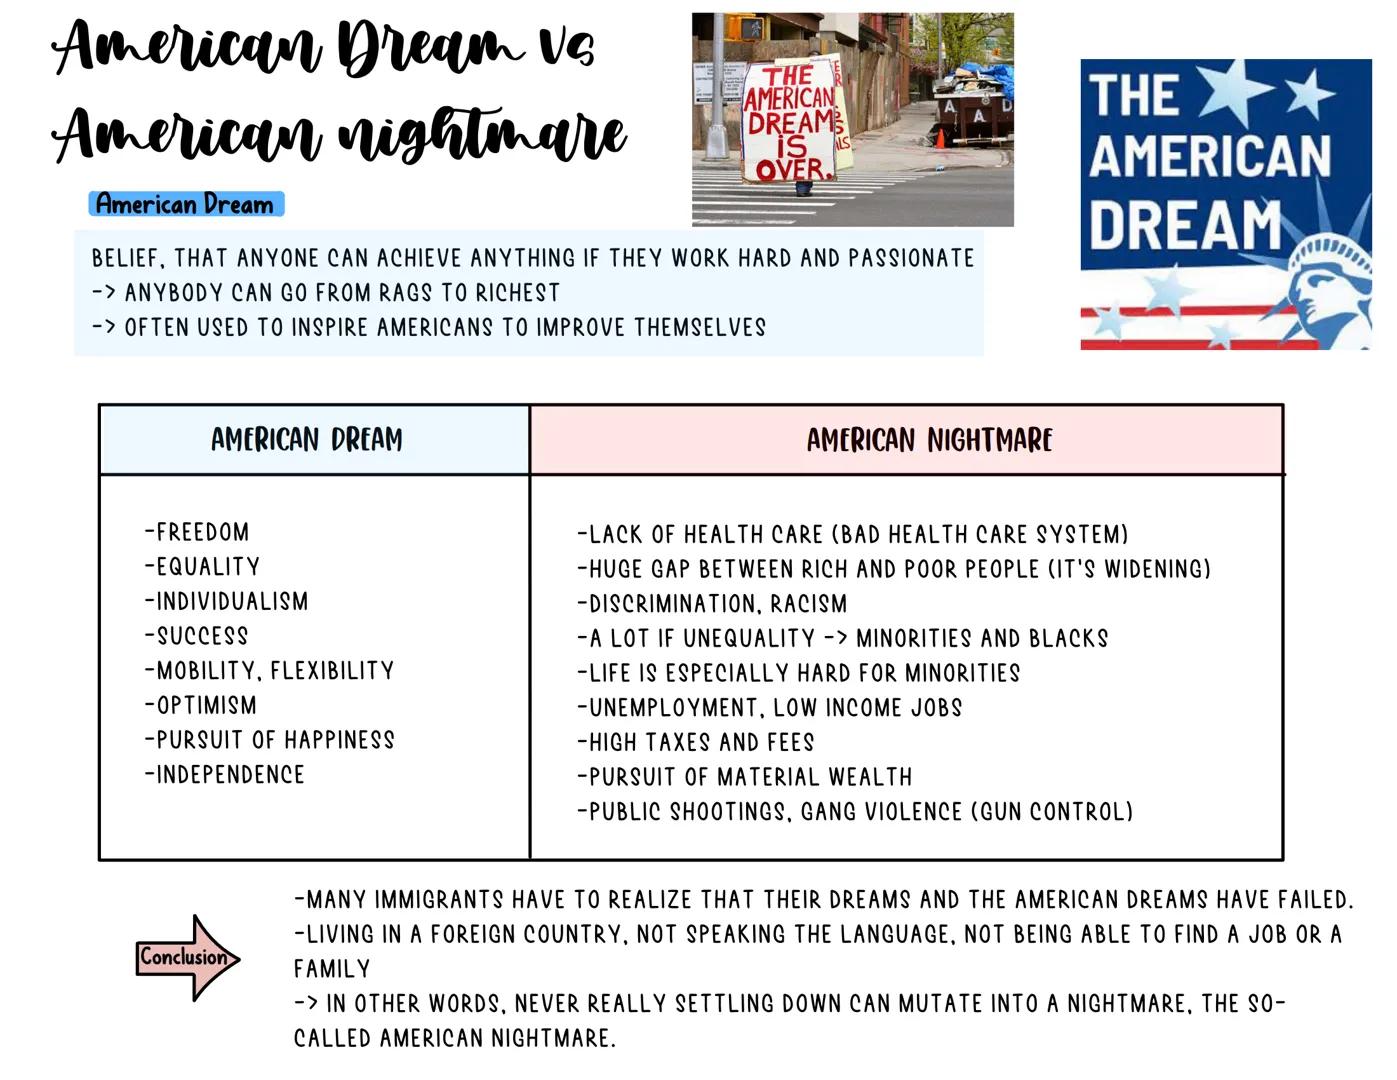 American Dream vs
American nightmare
AMERICAN DREAM
American Dream
BELIEF, THAT ANYONE CAN ACHIEVE ANYTHING IF THEY WORK HARD AND PASSIONATE